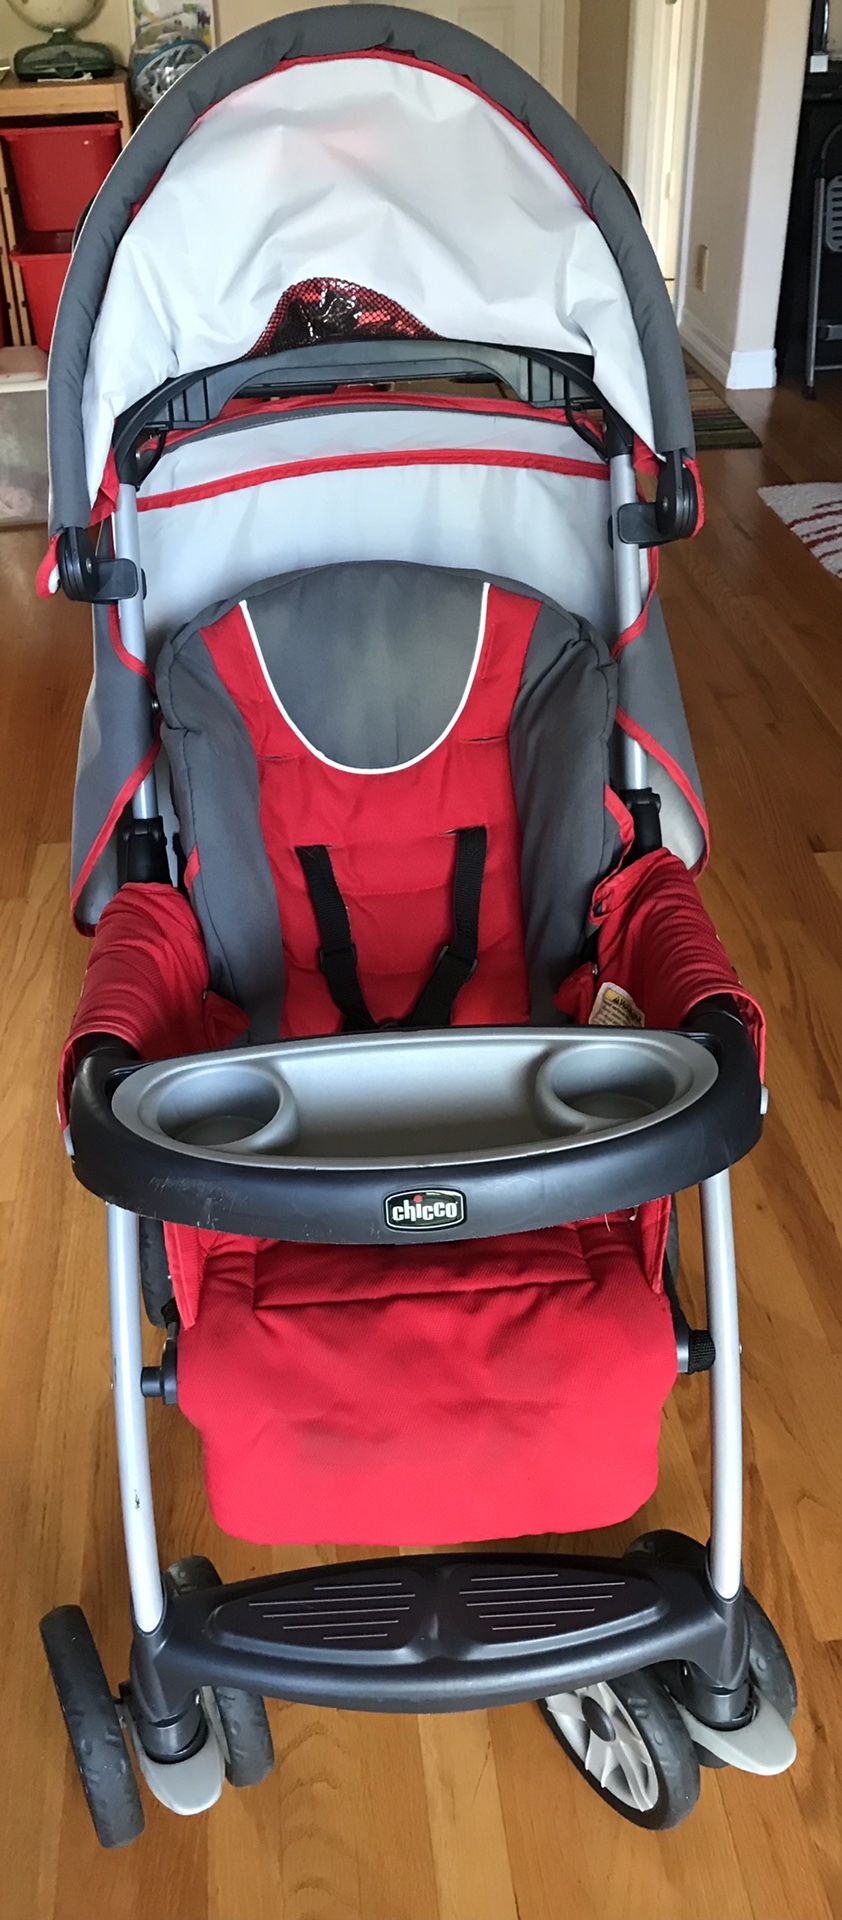 Chicco Stroller For $25